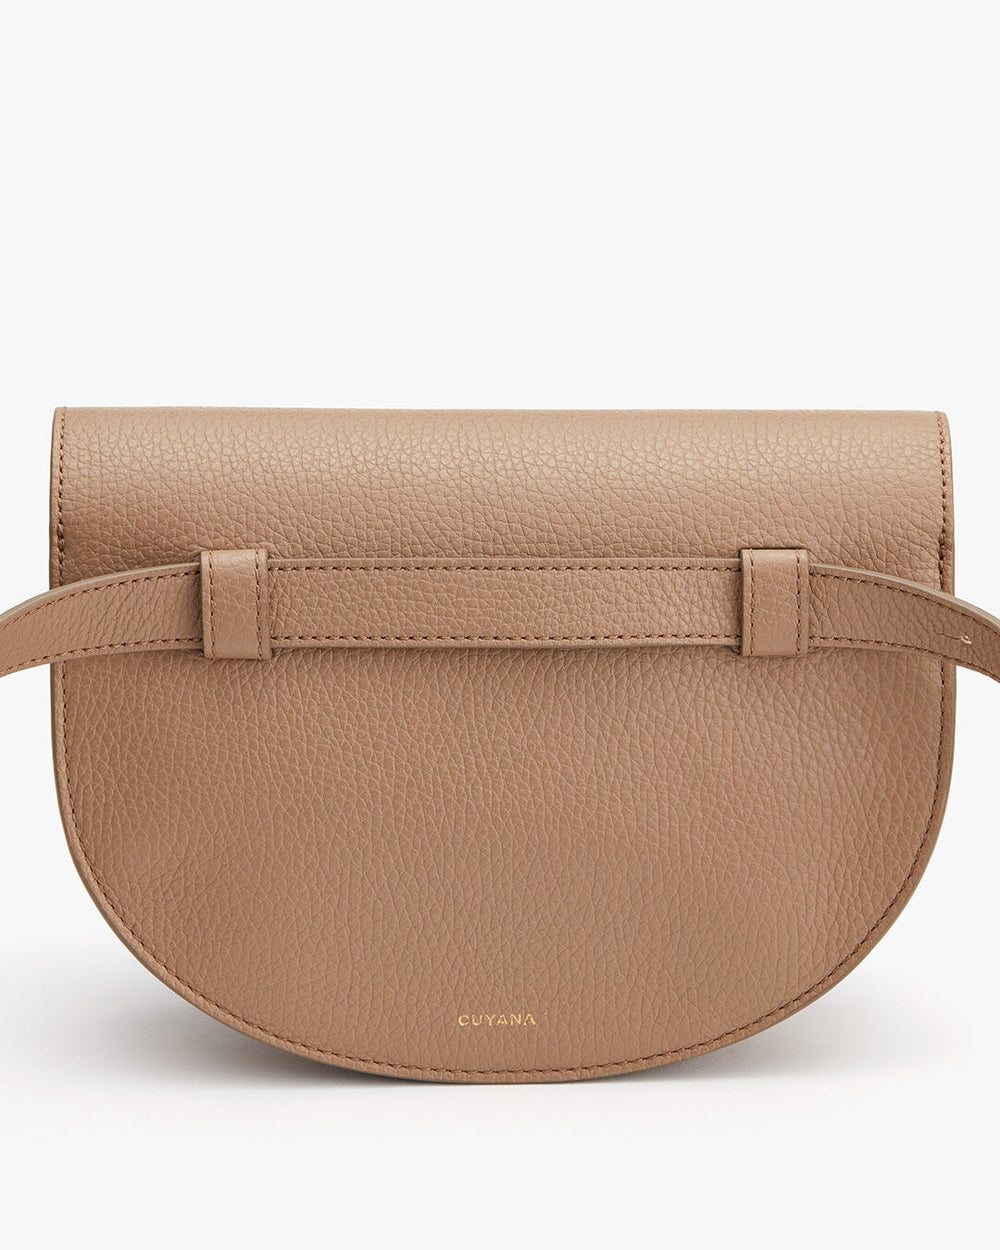 Small, textured crossbody bag with flap and front strap closure.